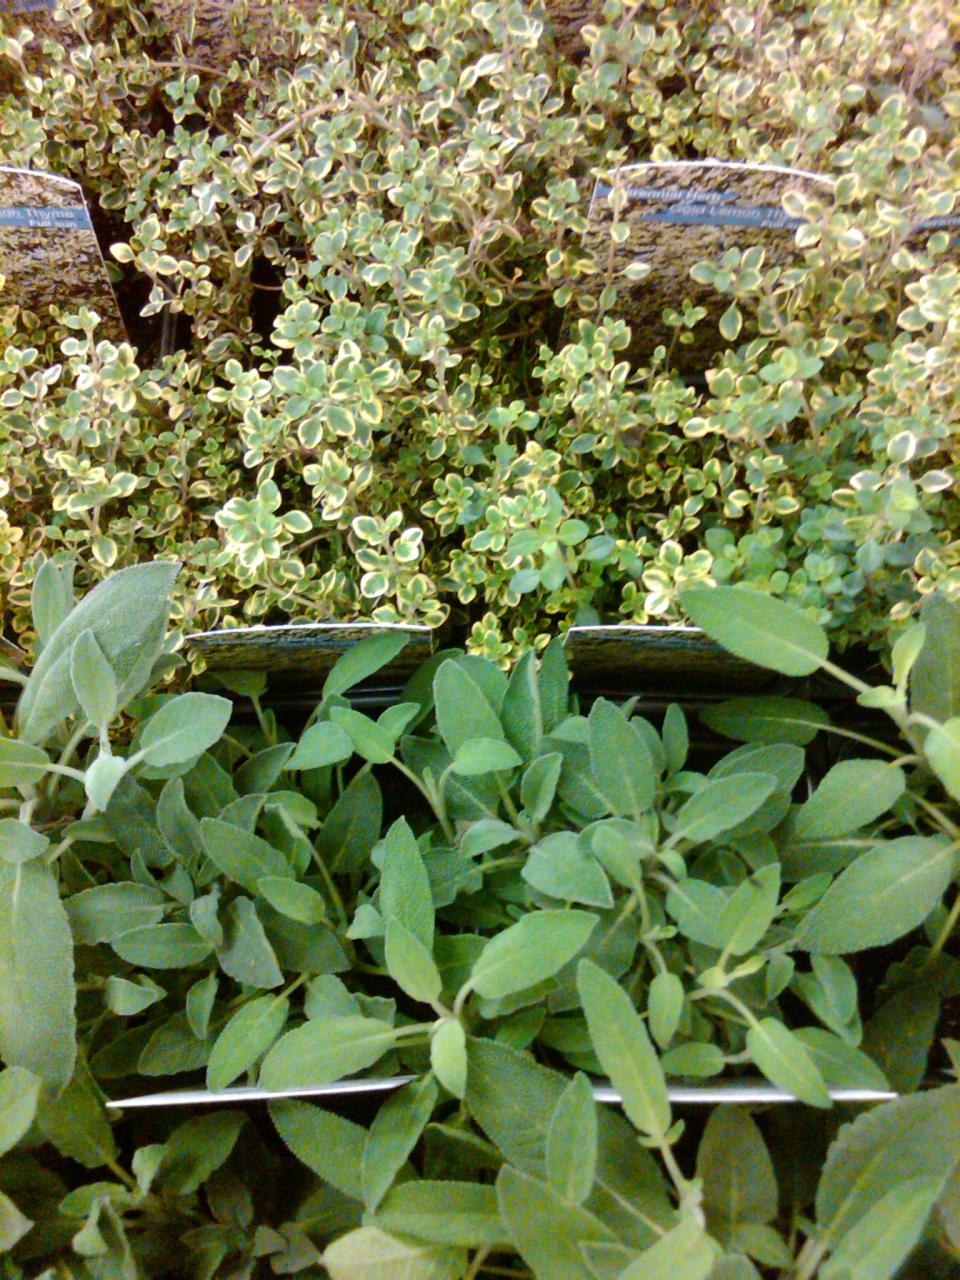 Herbs make an easy addition to any type of gardening and are perfect to have accessible for your everyday cooking.